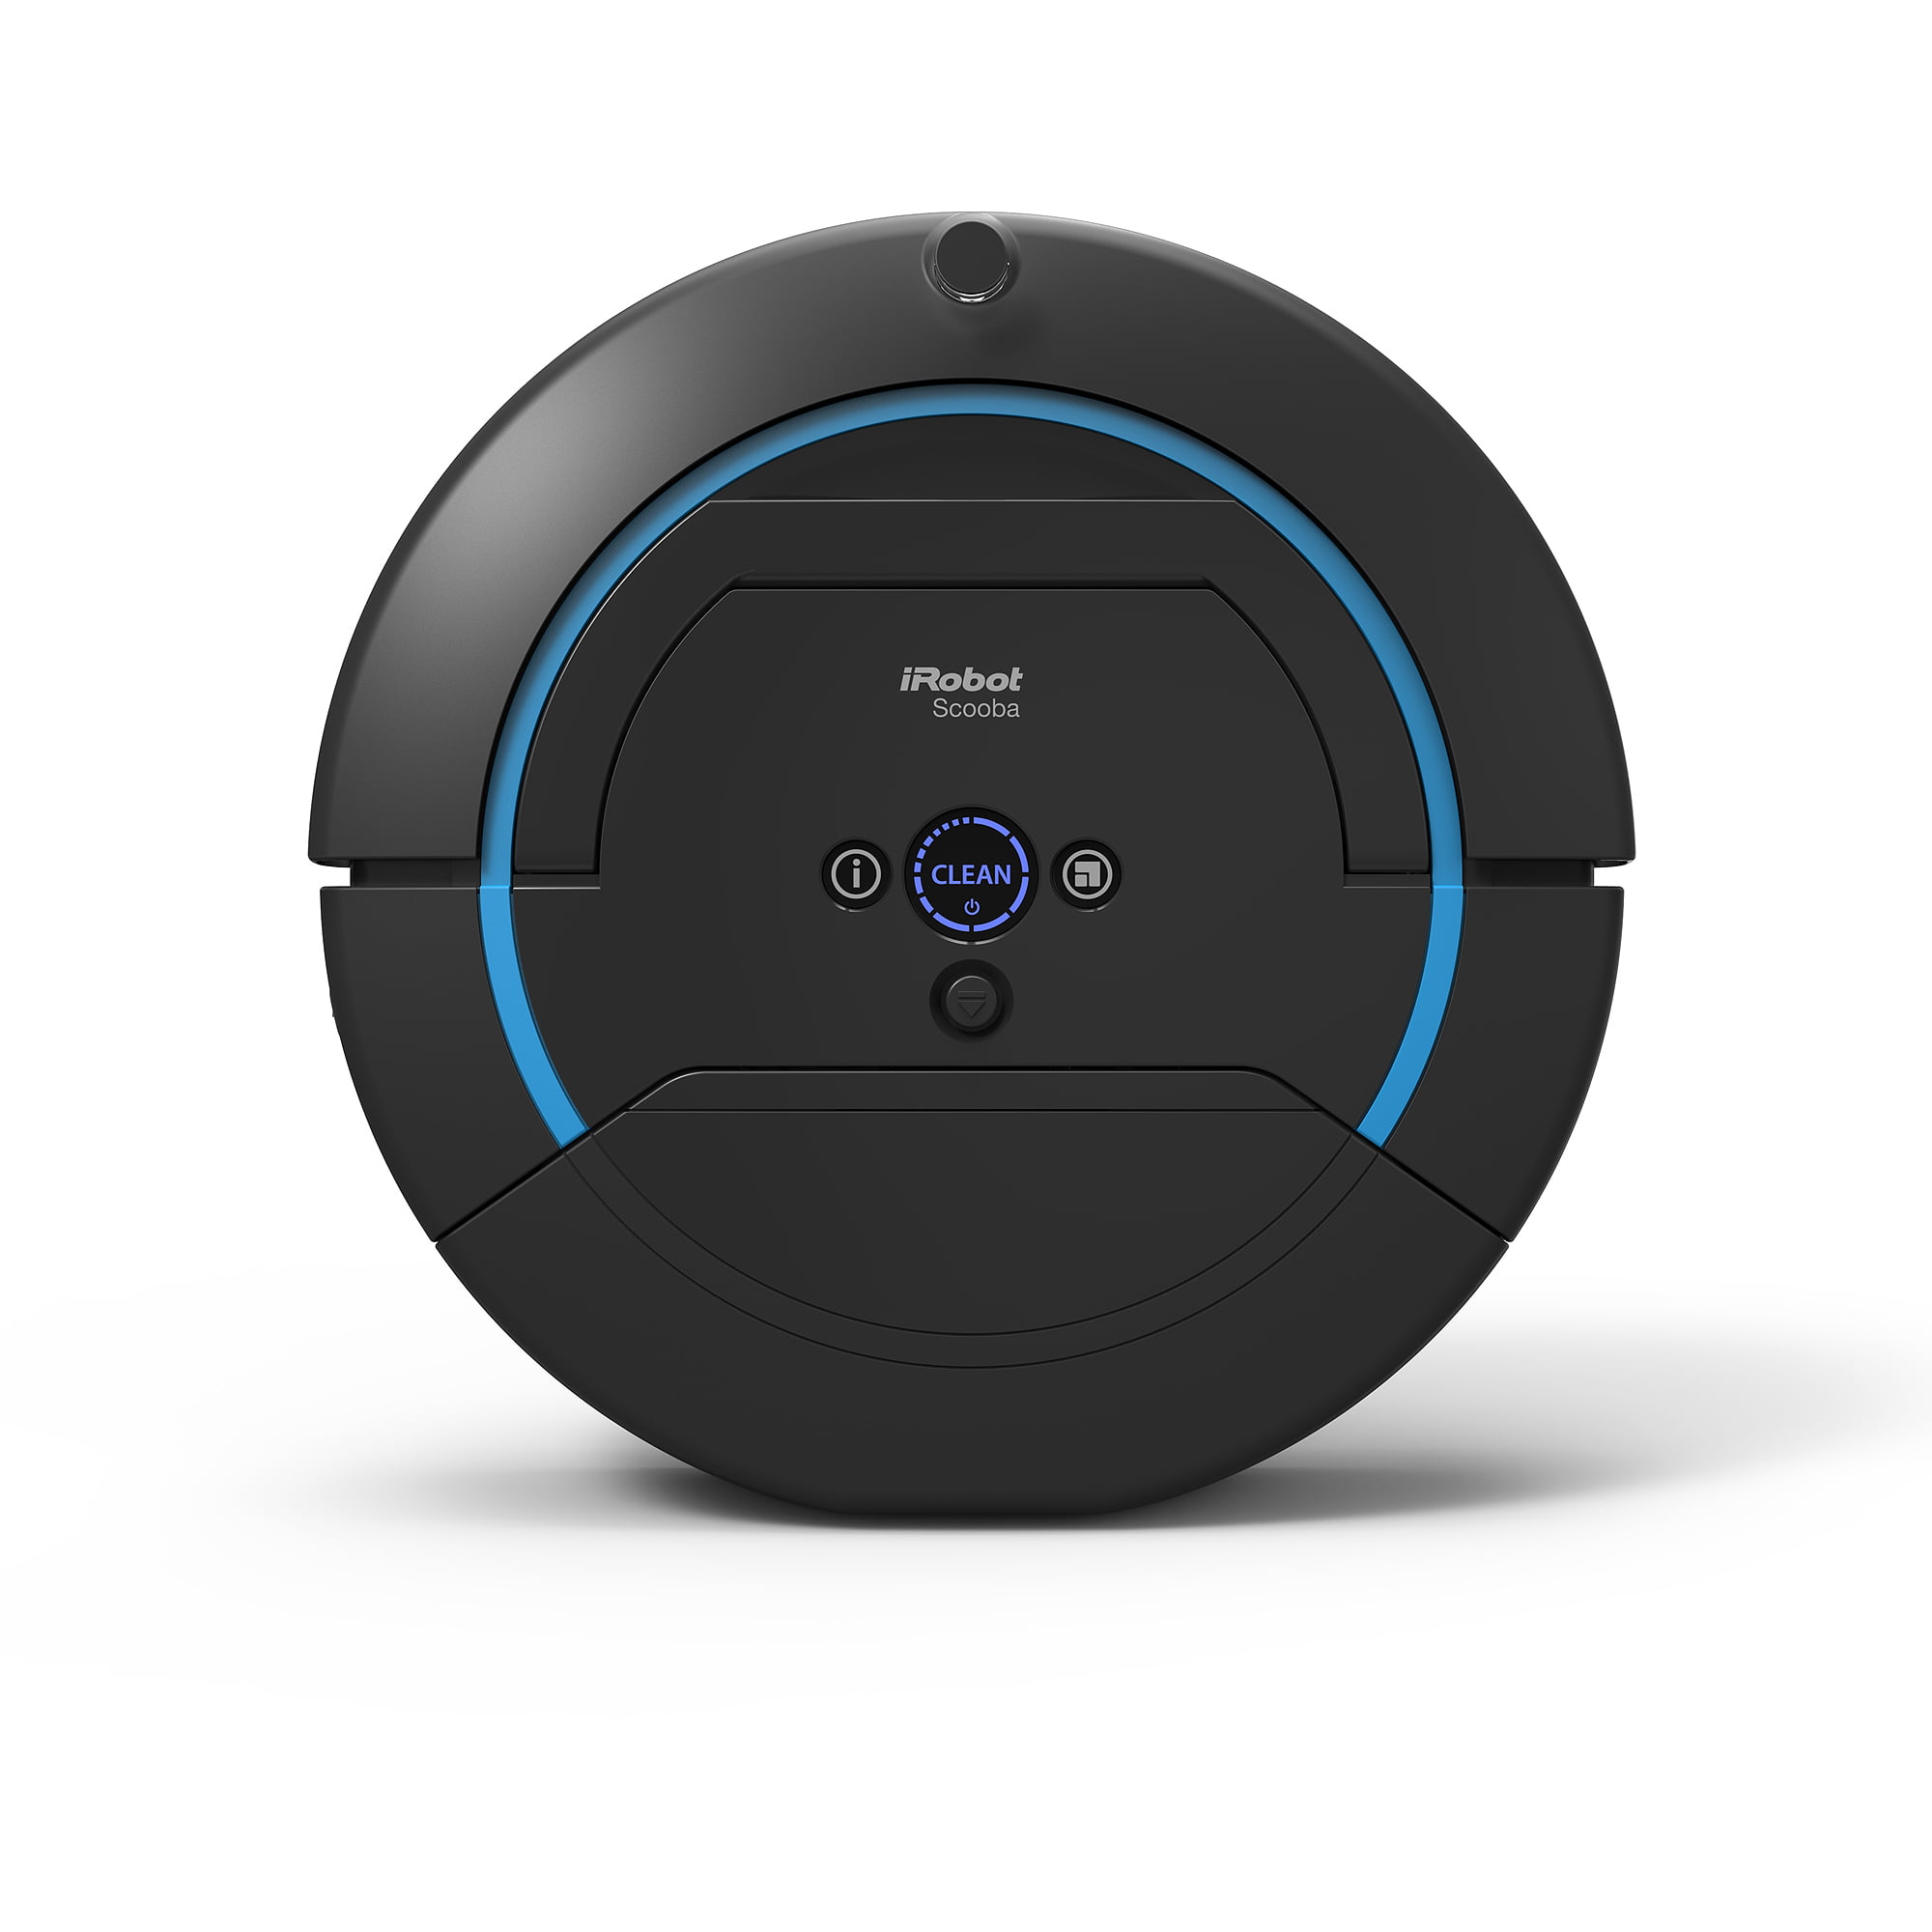 What are customer reviews on the iRobot Roomba 595?